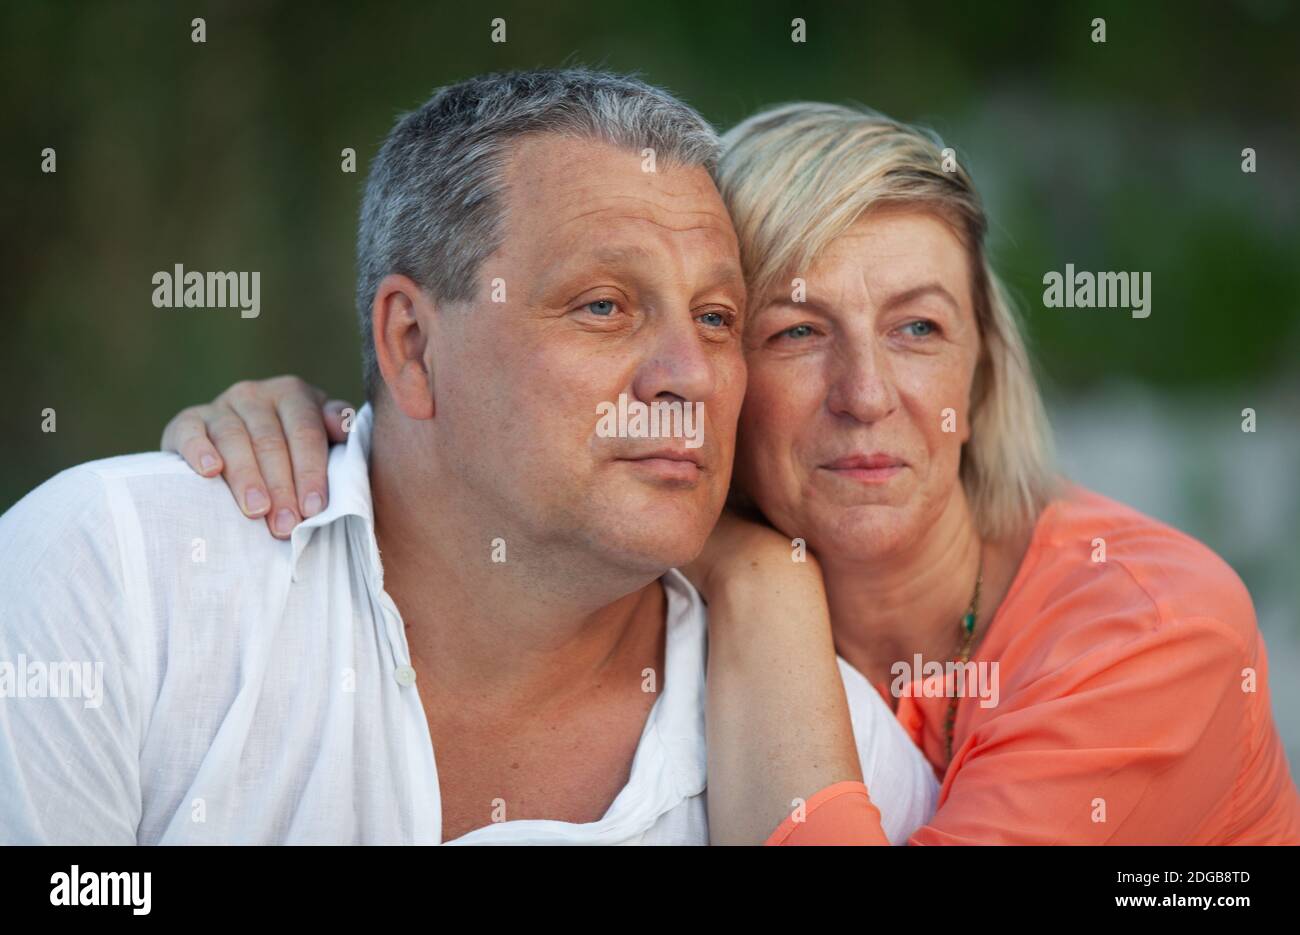 A portrait of a smiling middle aged couple looking into the distance Stock Photo